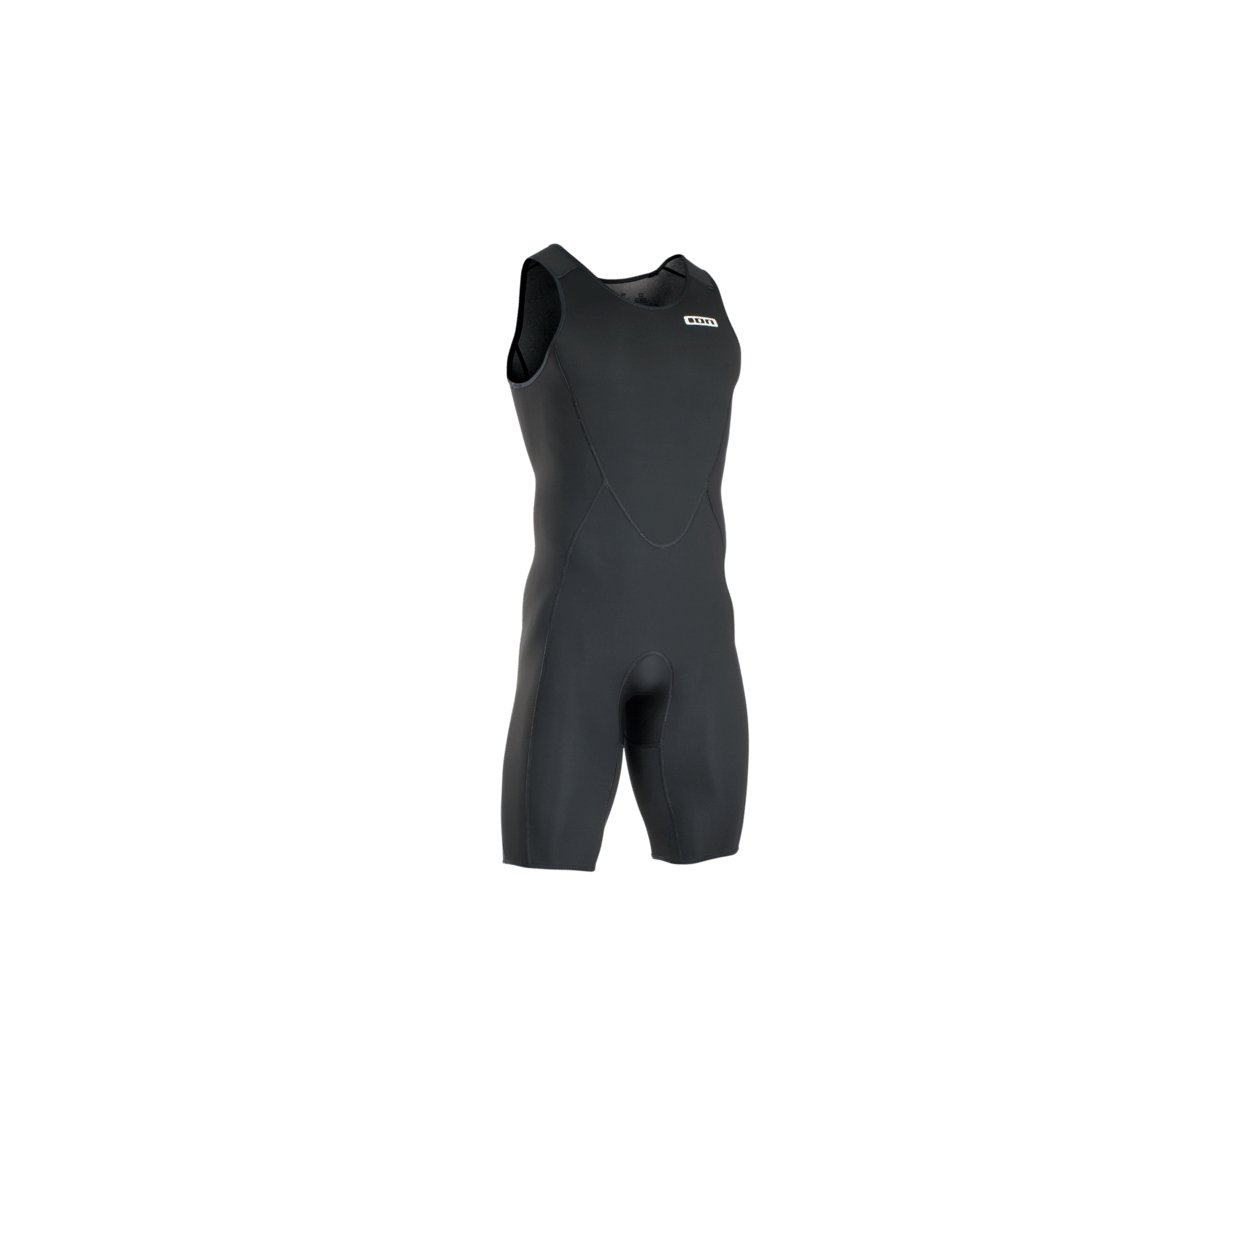 ION Monoshorty 2.0 2022 - Worthing Watersports - 9008415881192 - Wetsuits - ION Water